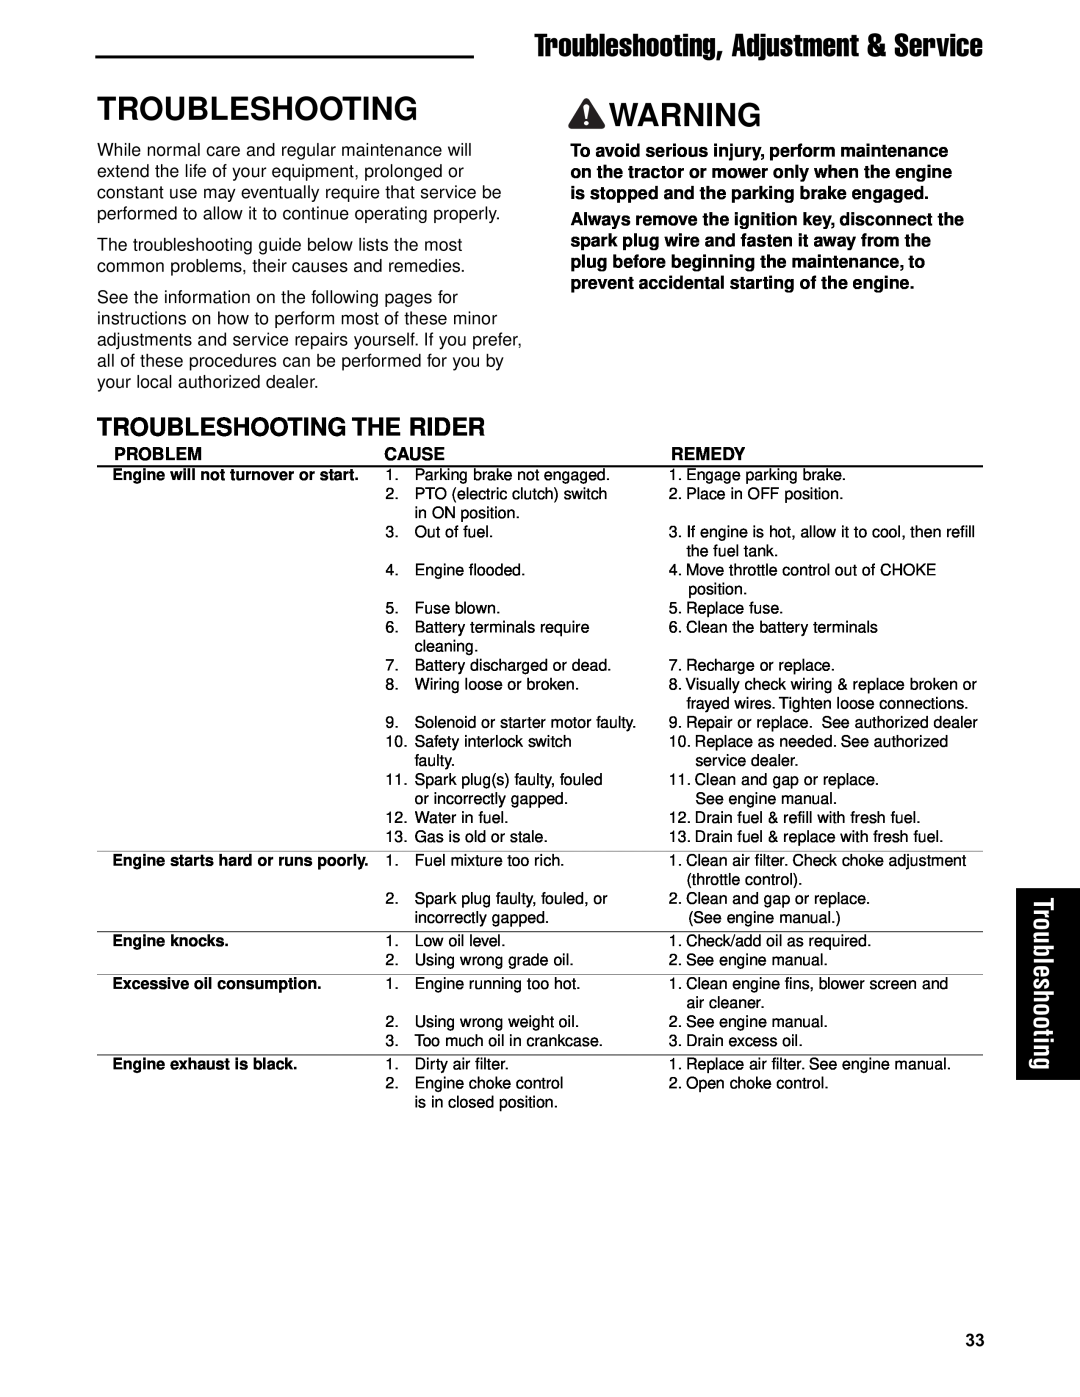 Briggs & Stratton 5900612 manual Troubleshooting, Adjustment & Service, Troubleshooting Warning, Troubleshooting The Rider 